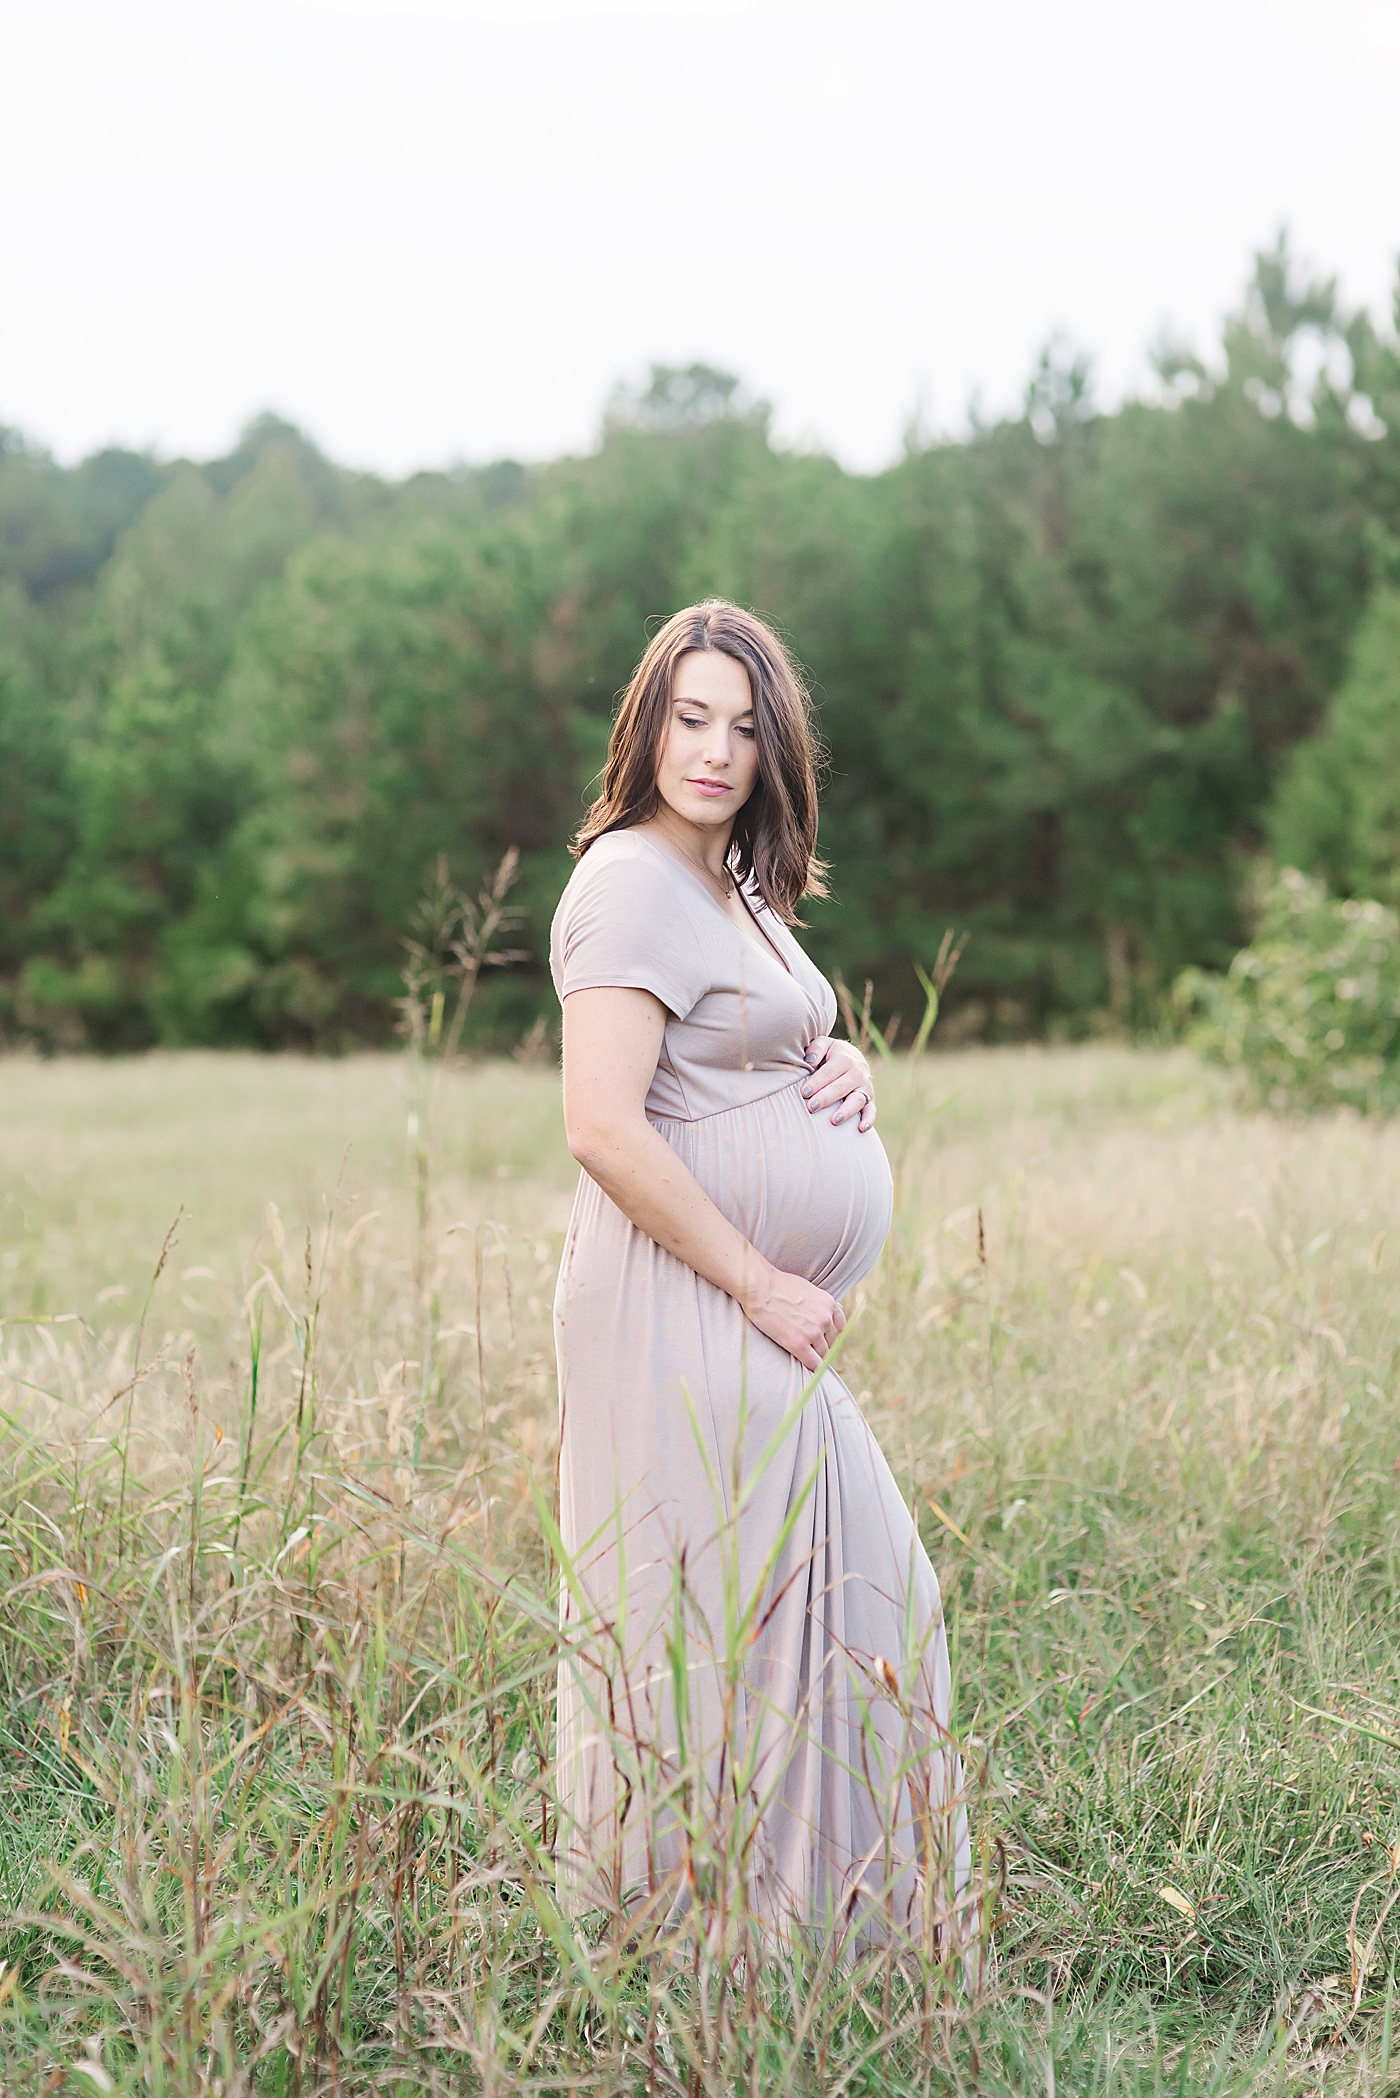 Mom to be in mauve dress standing in a field | Photo by Anna Wisjo